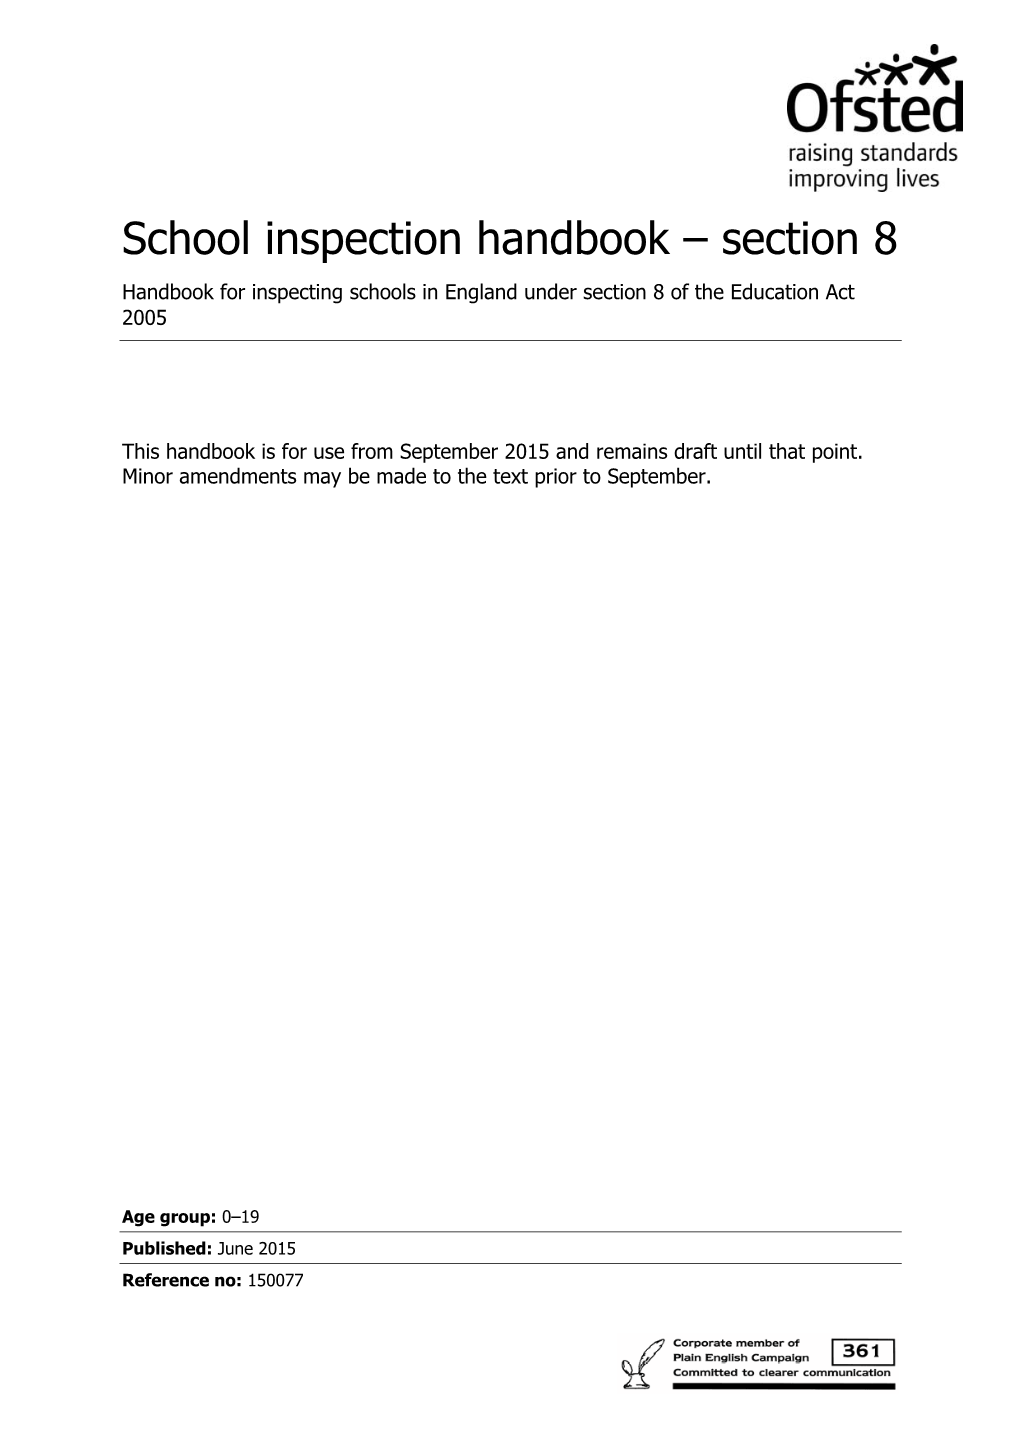 Section 8 Handbook for Inspecting Schools in England Under Section 8 of the Education Act 2005